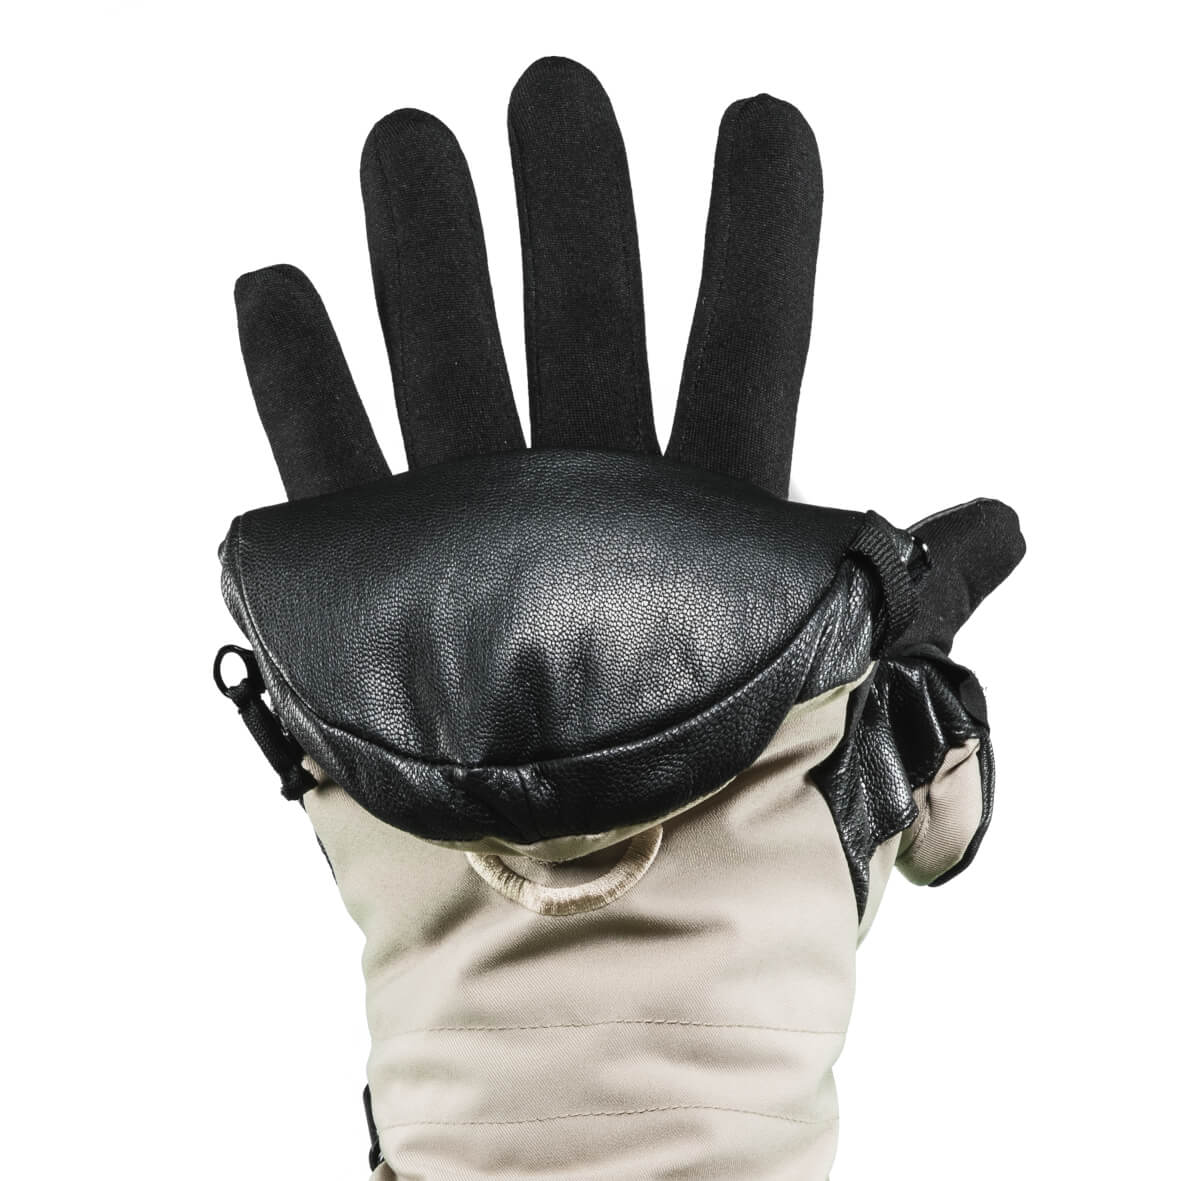 Heat Company Layer System Gloves with Tactility Liners 